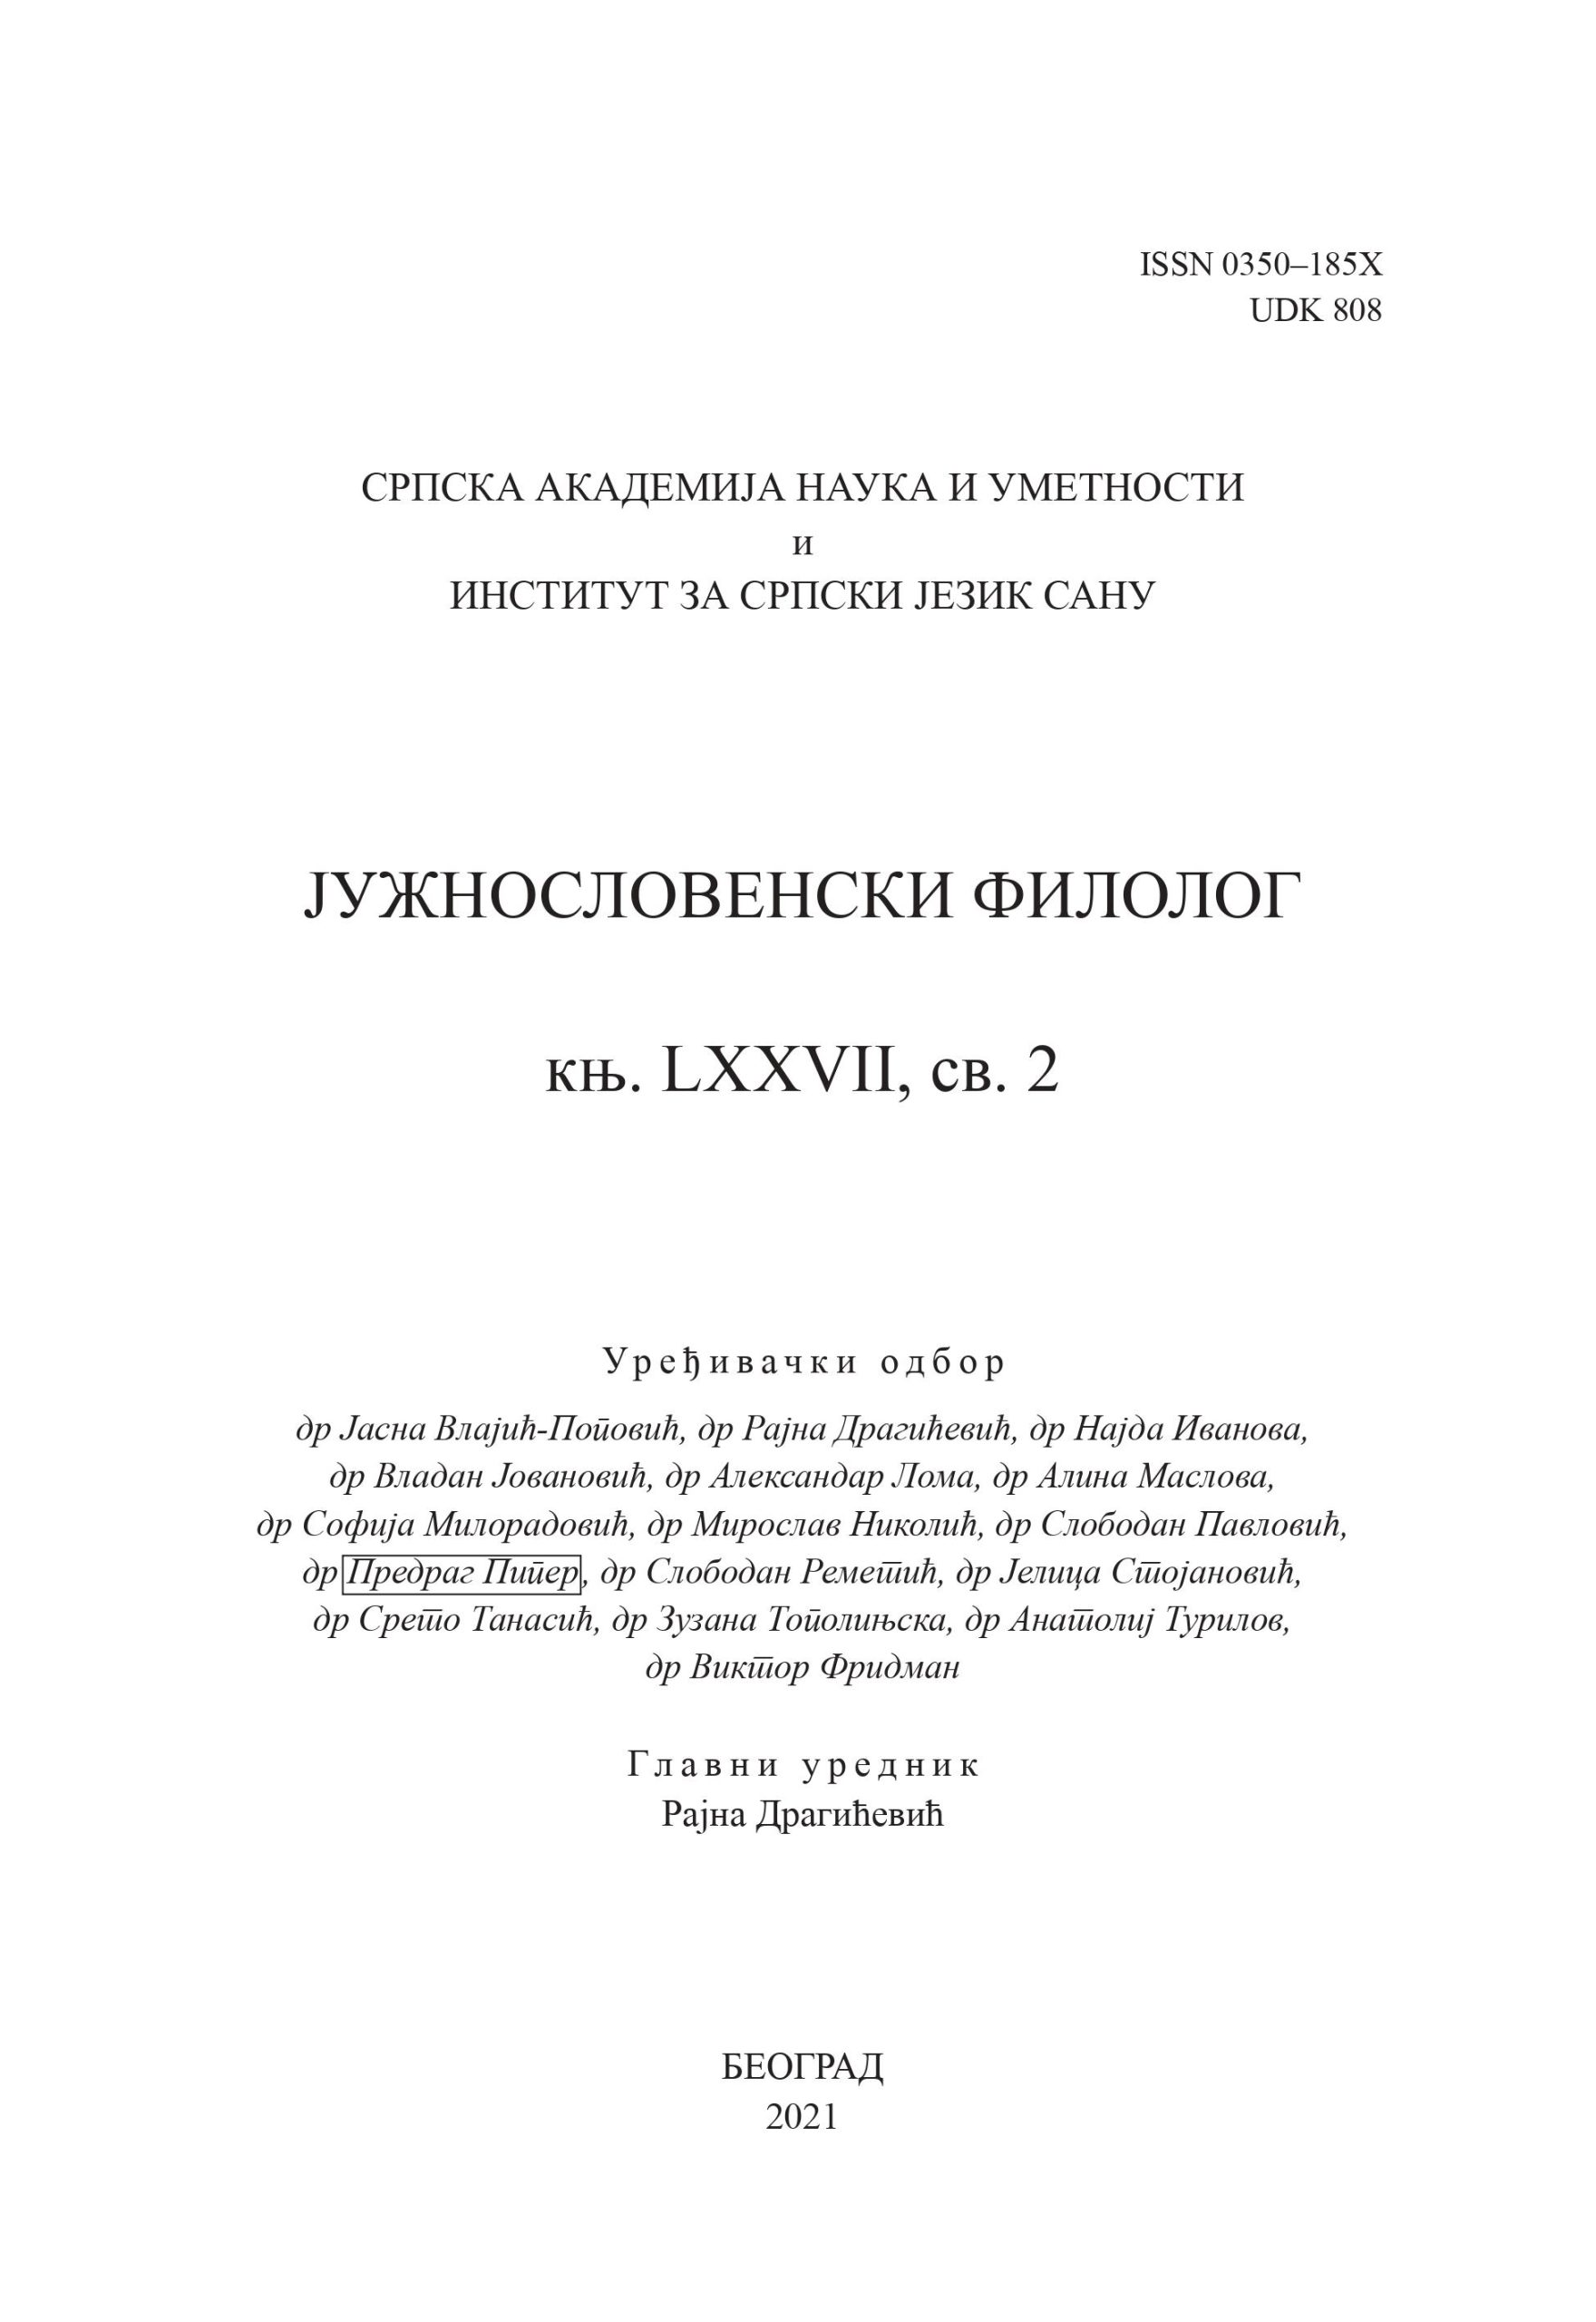 South Slavic Philologist Cover Image